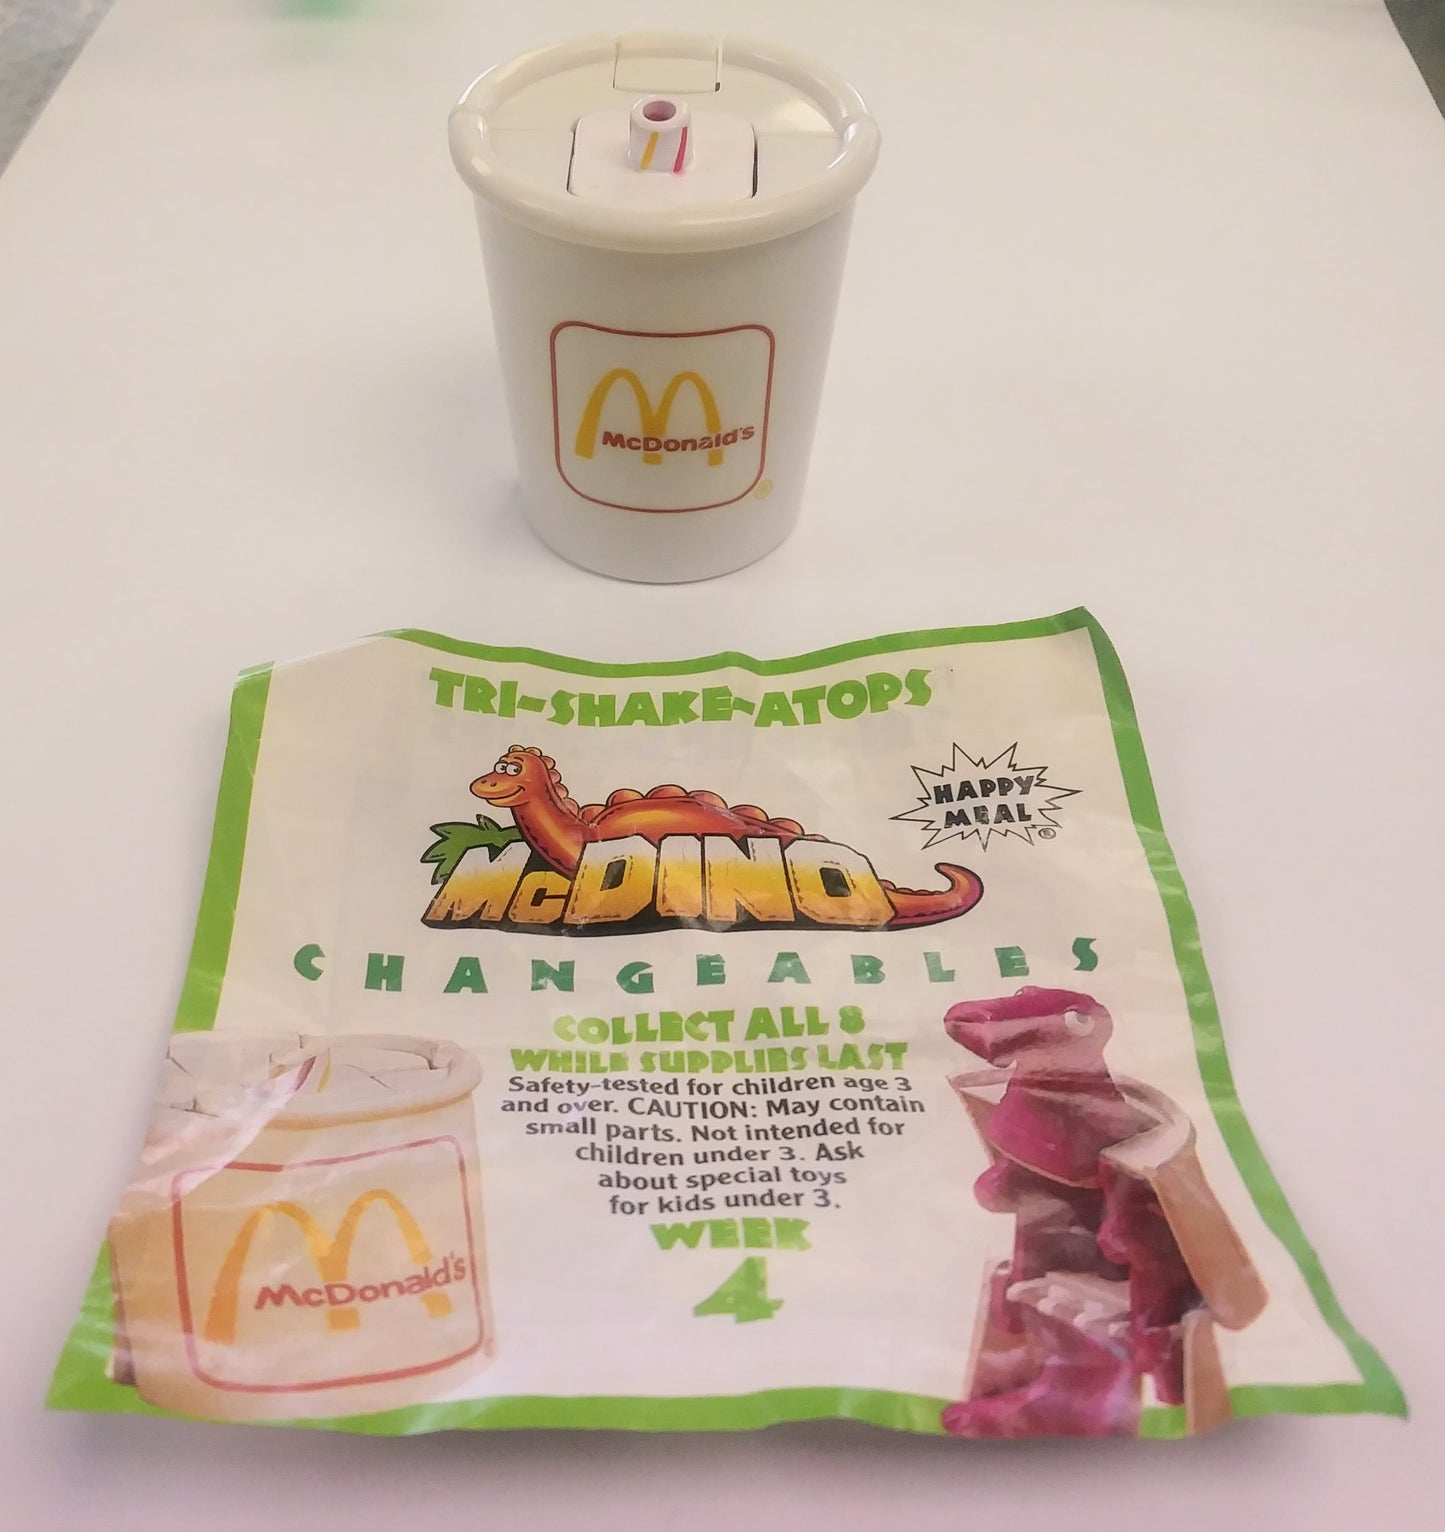 McDonald's Happy Meal toy - Tri-shake-atops